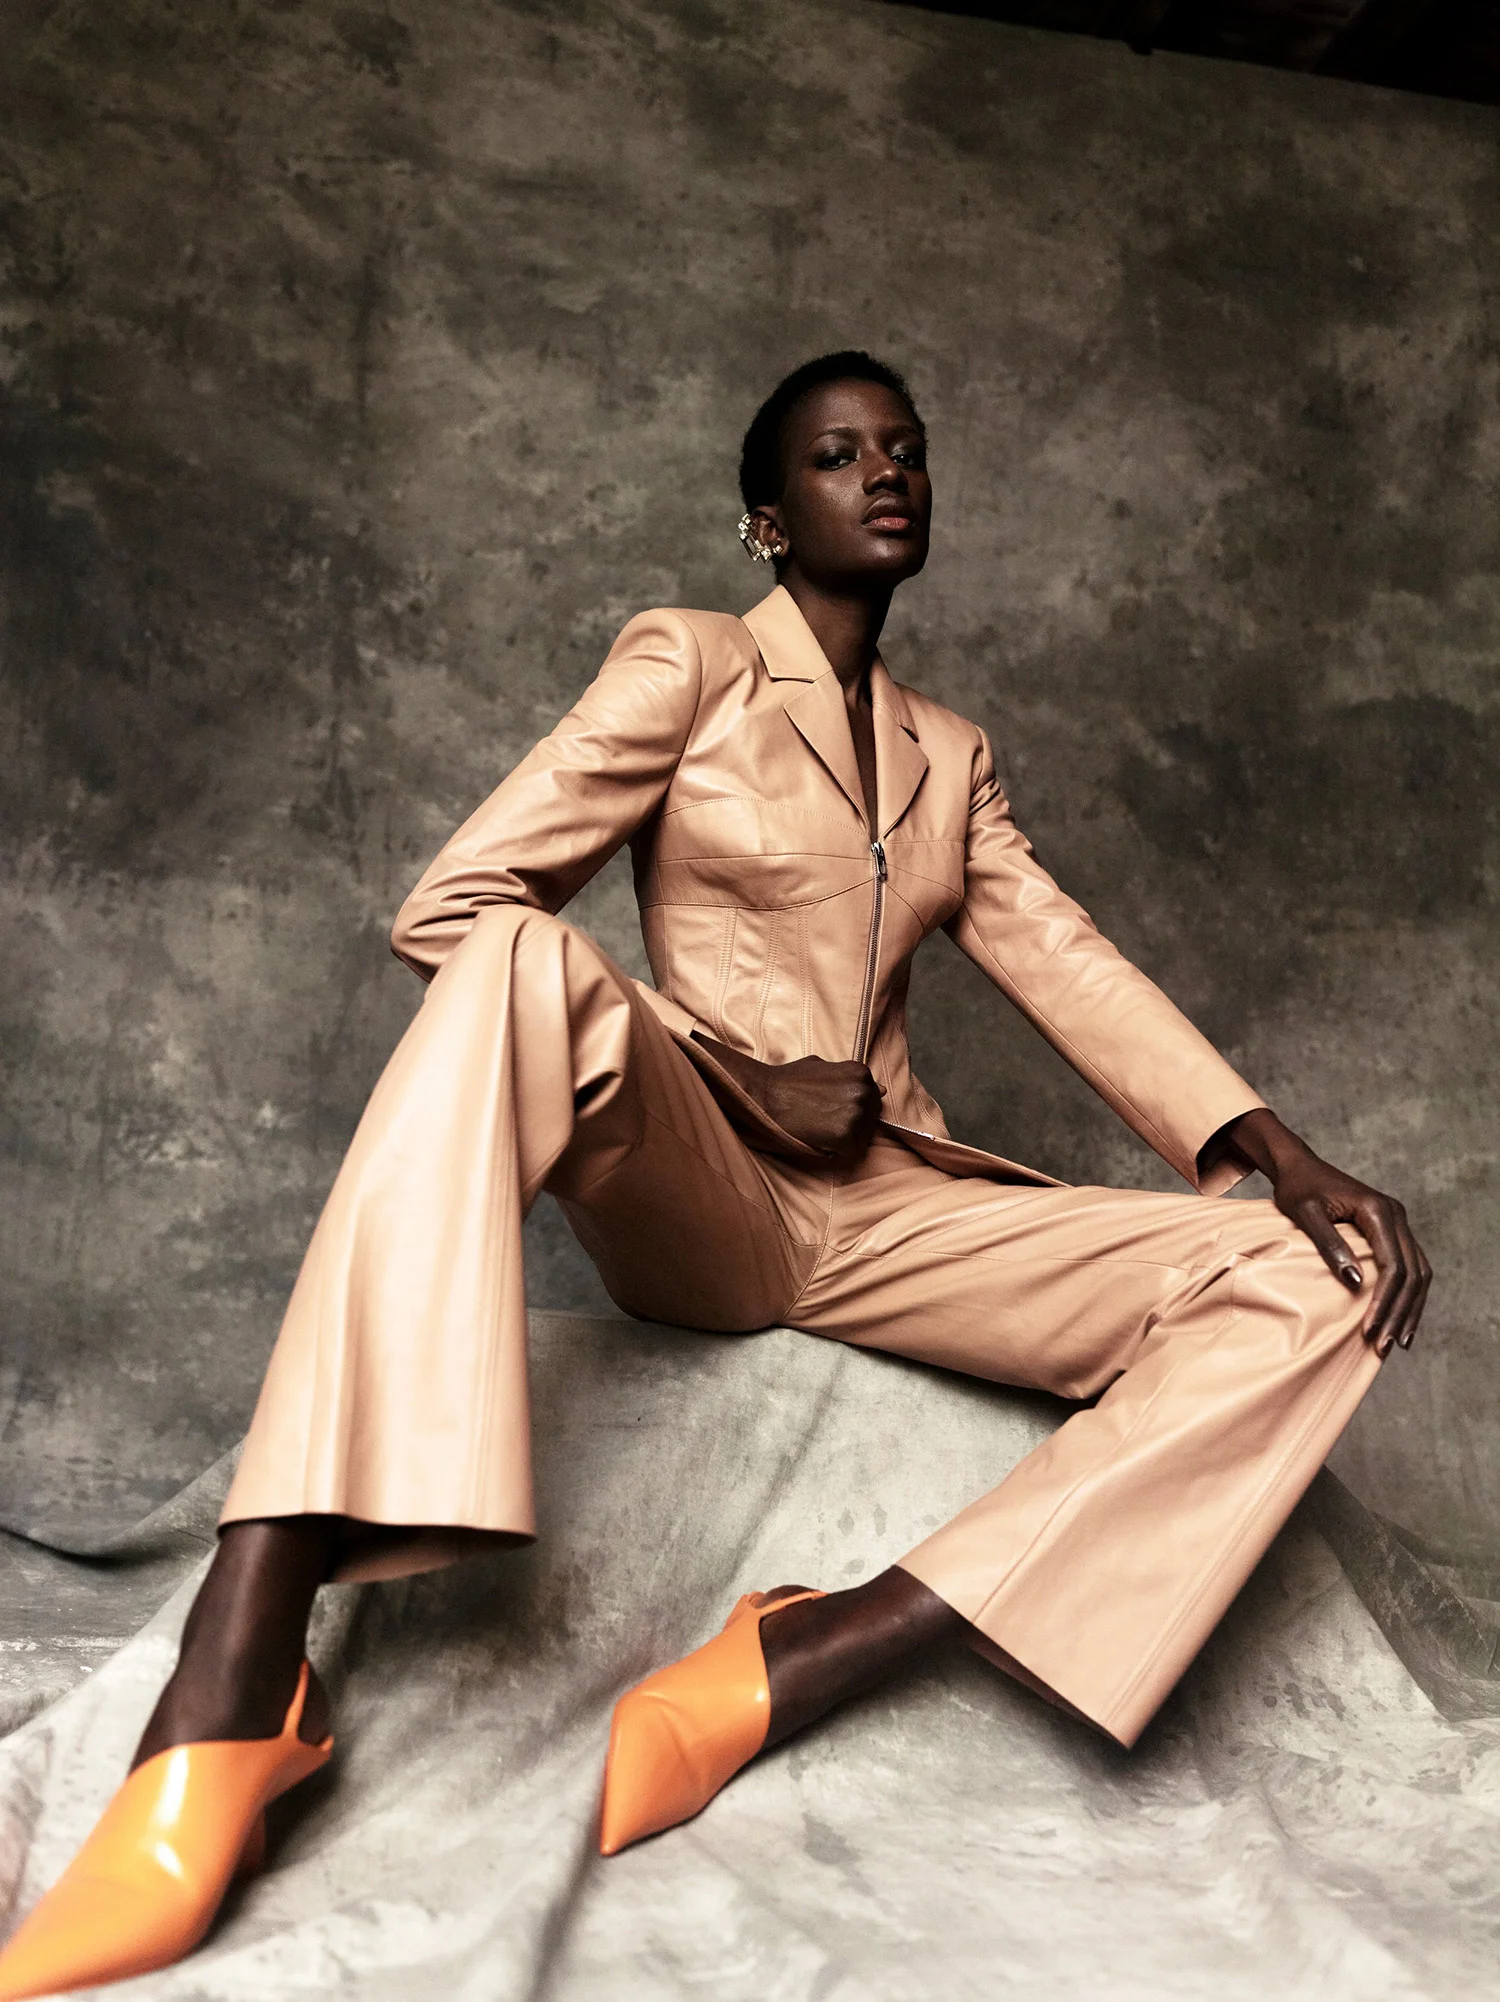 Samb Fatou by Peter Gehrke for Amica Magazine April 2022